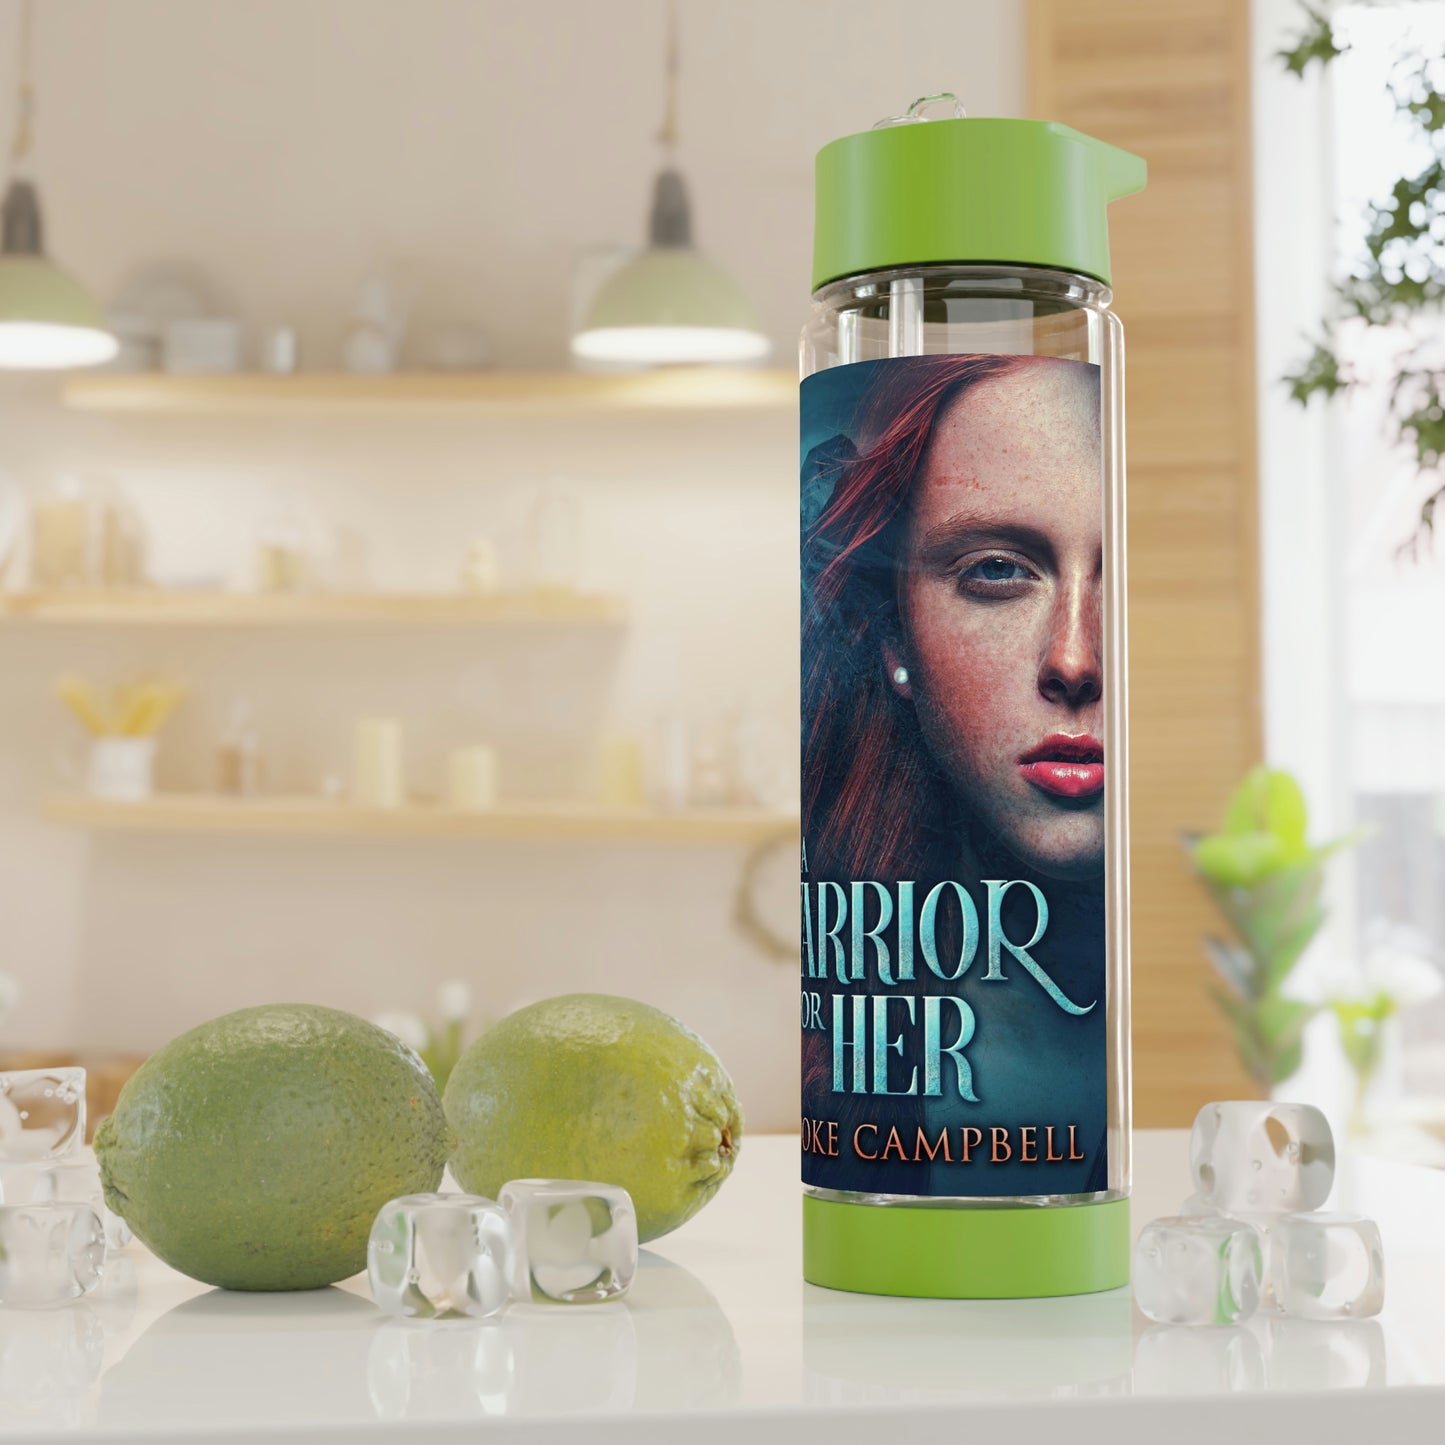 A Warrior For Her - Infuser Water Bottle